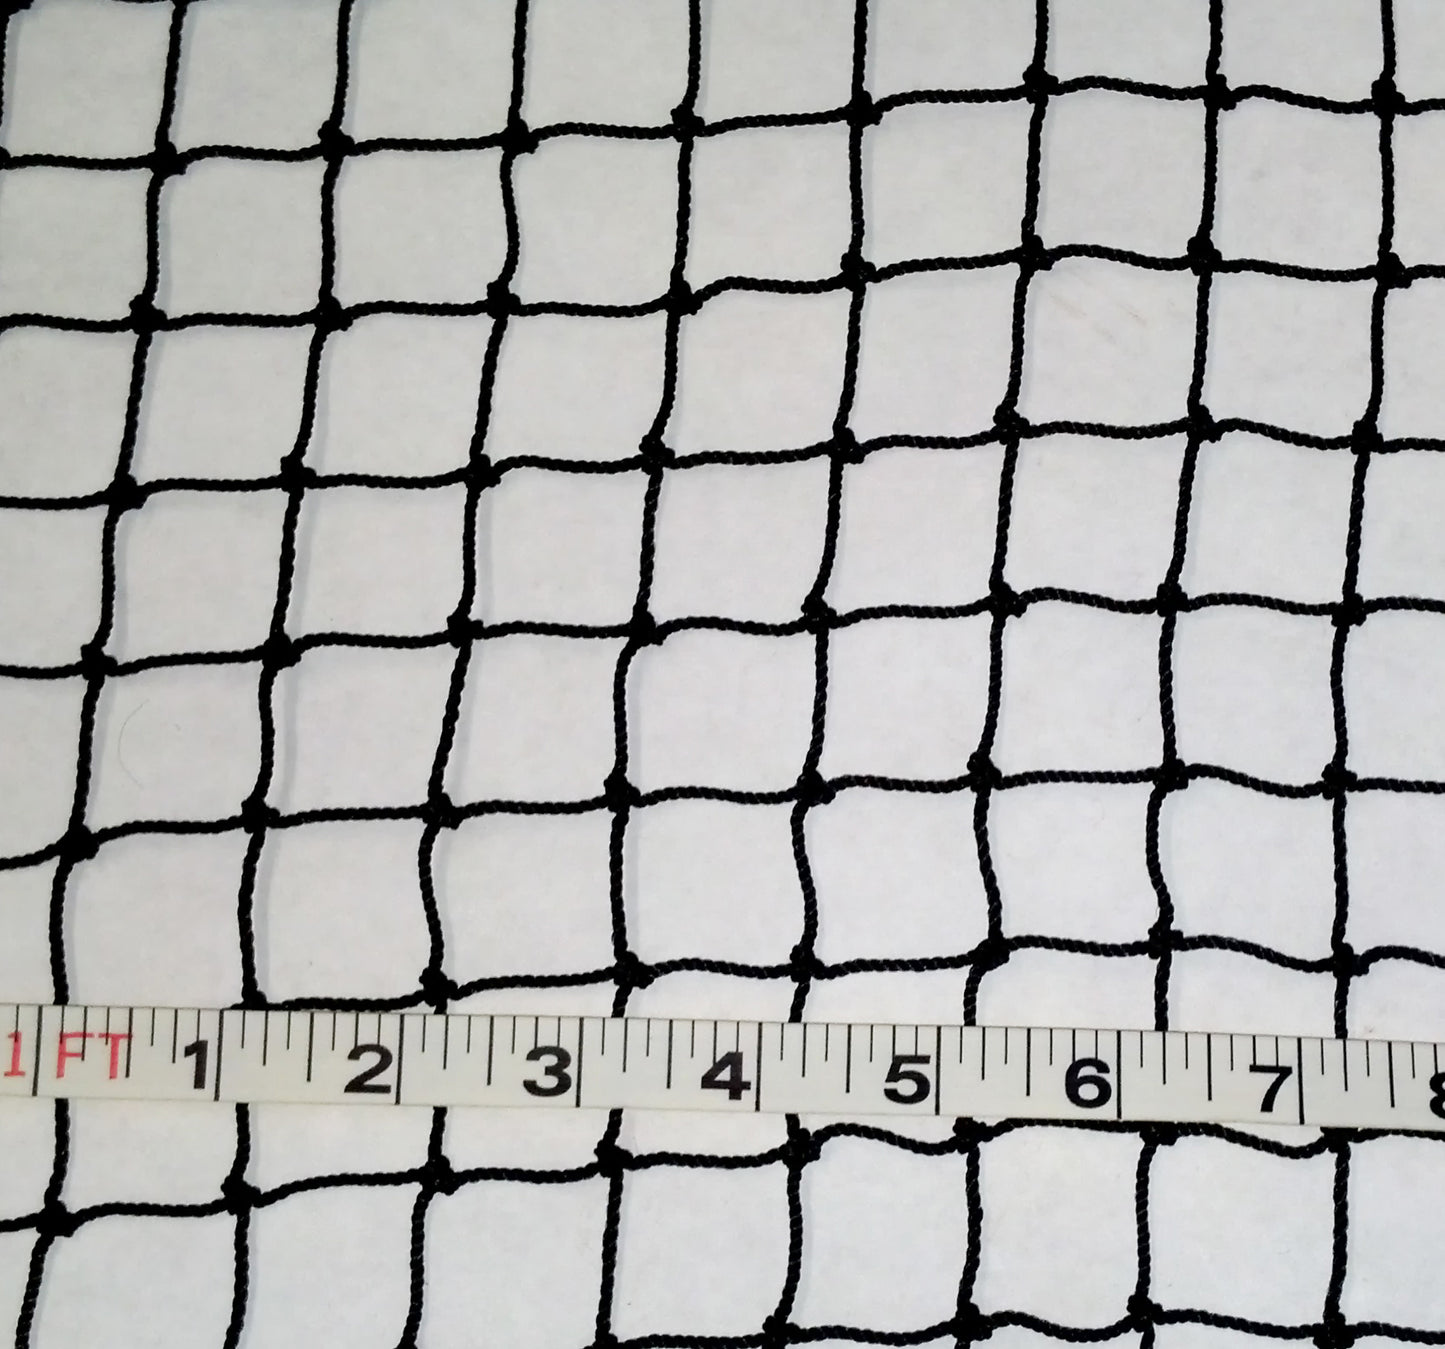 A white cloth with black netting and a ruler